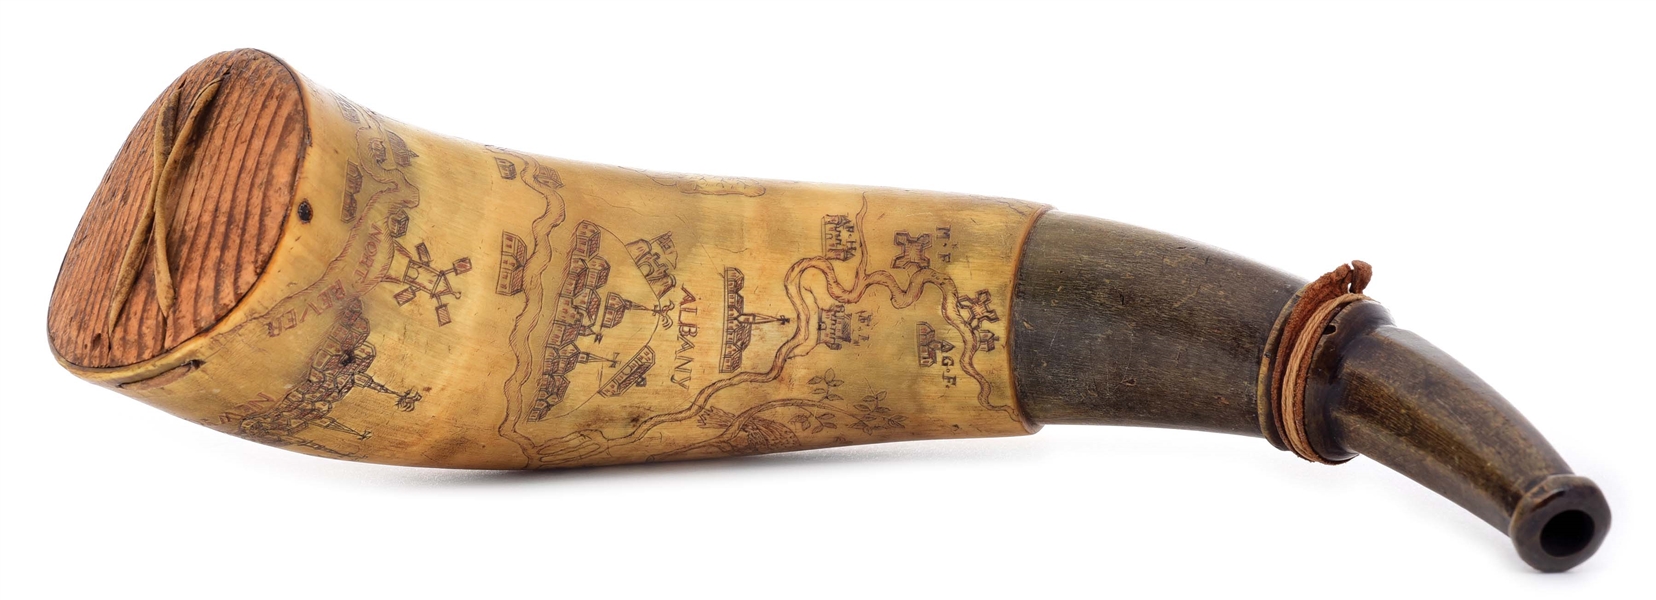 FINE FRENCH AND INDIAN WAR ENGRAVED NEW YORK MAP POWDER HORN.